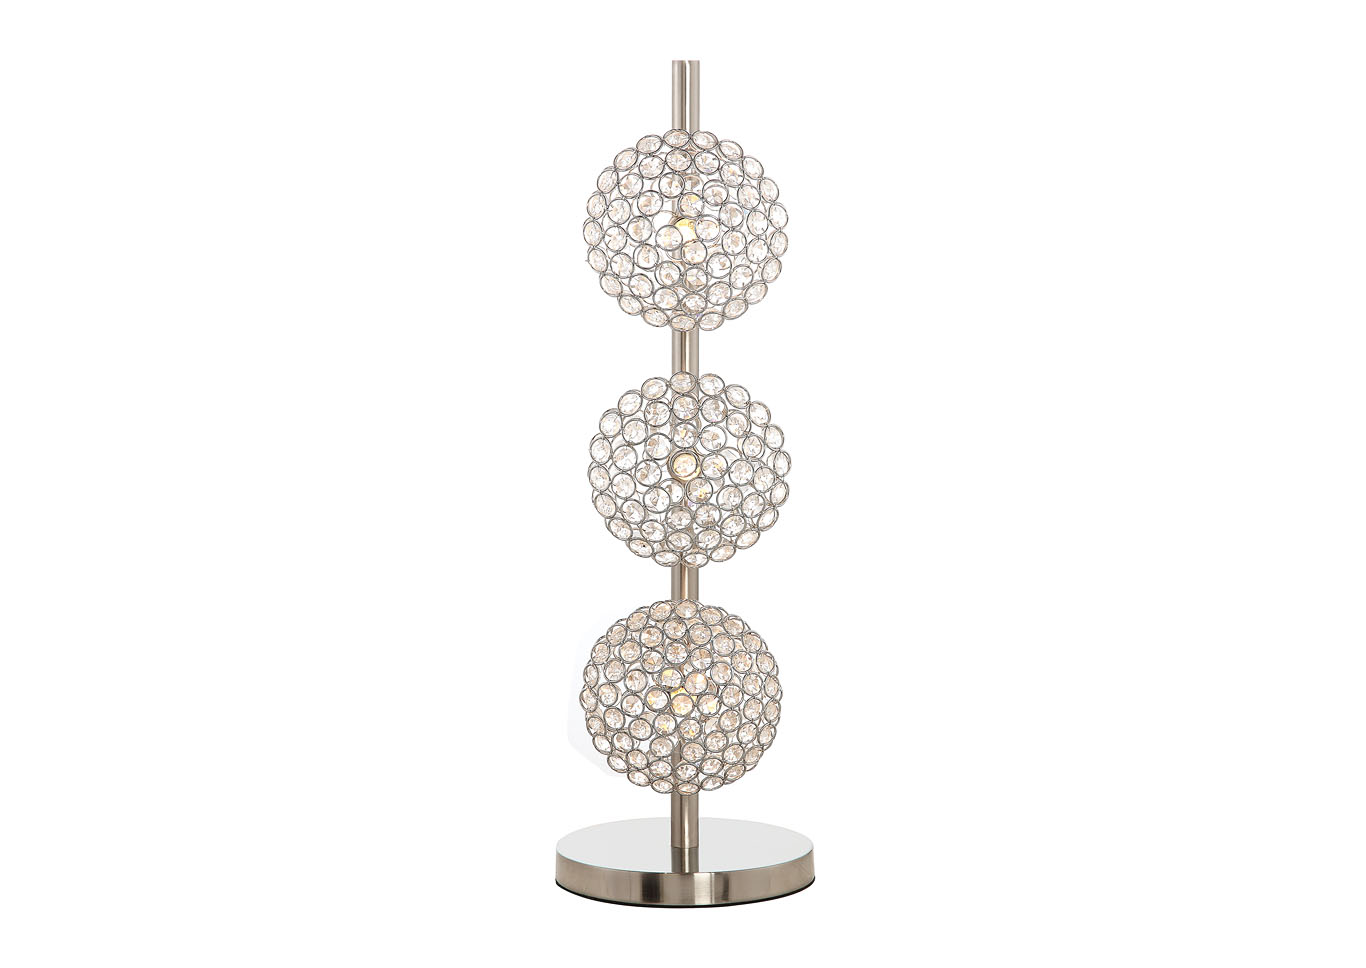 25.75"H TABLE LAMP,Instore